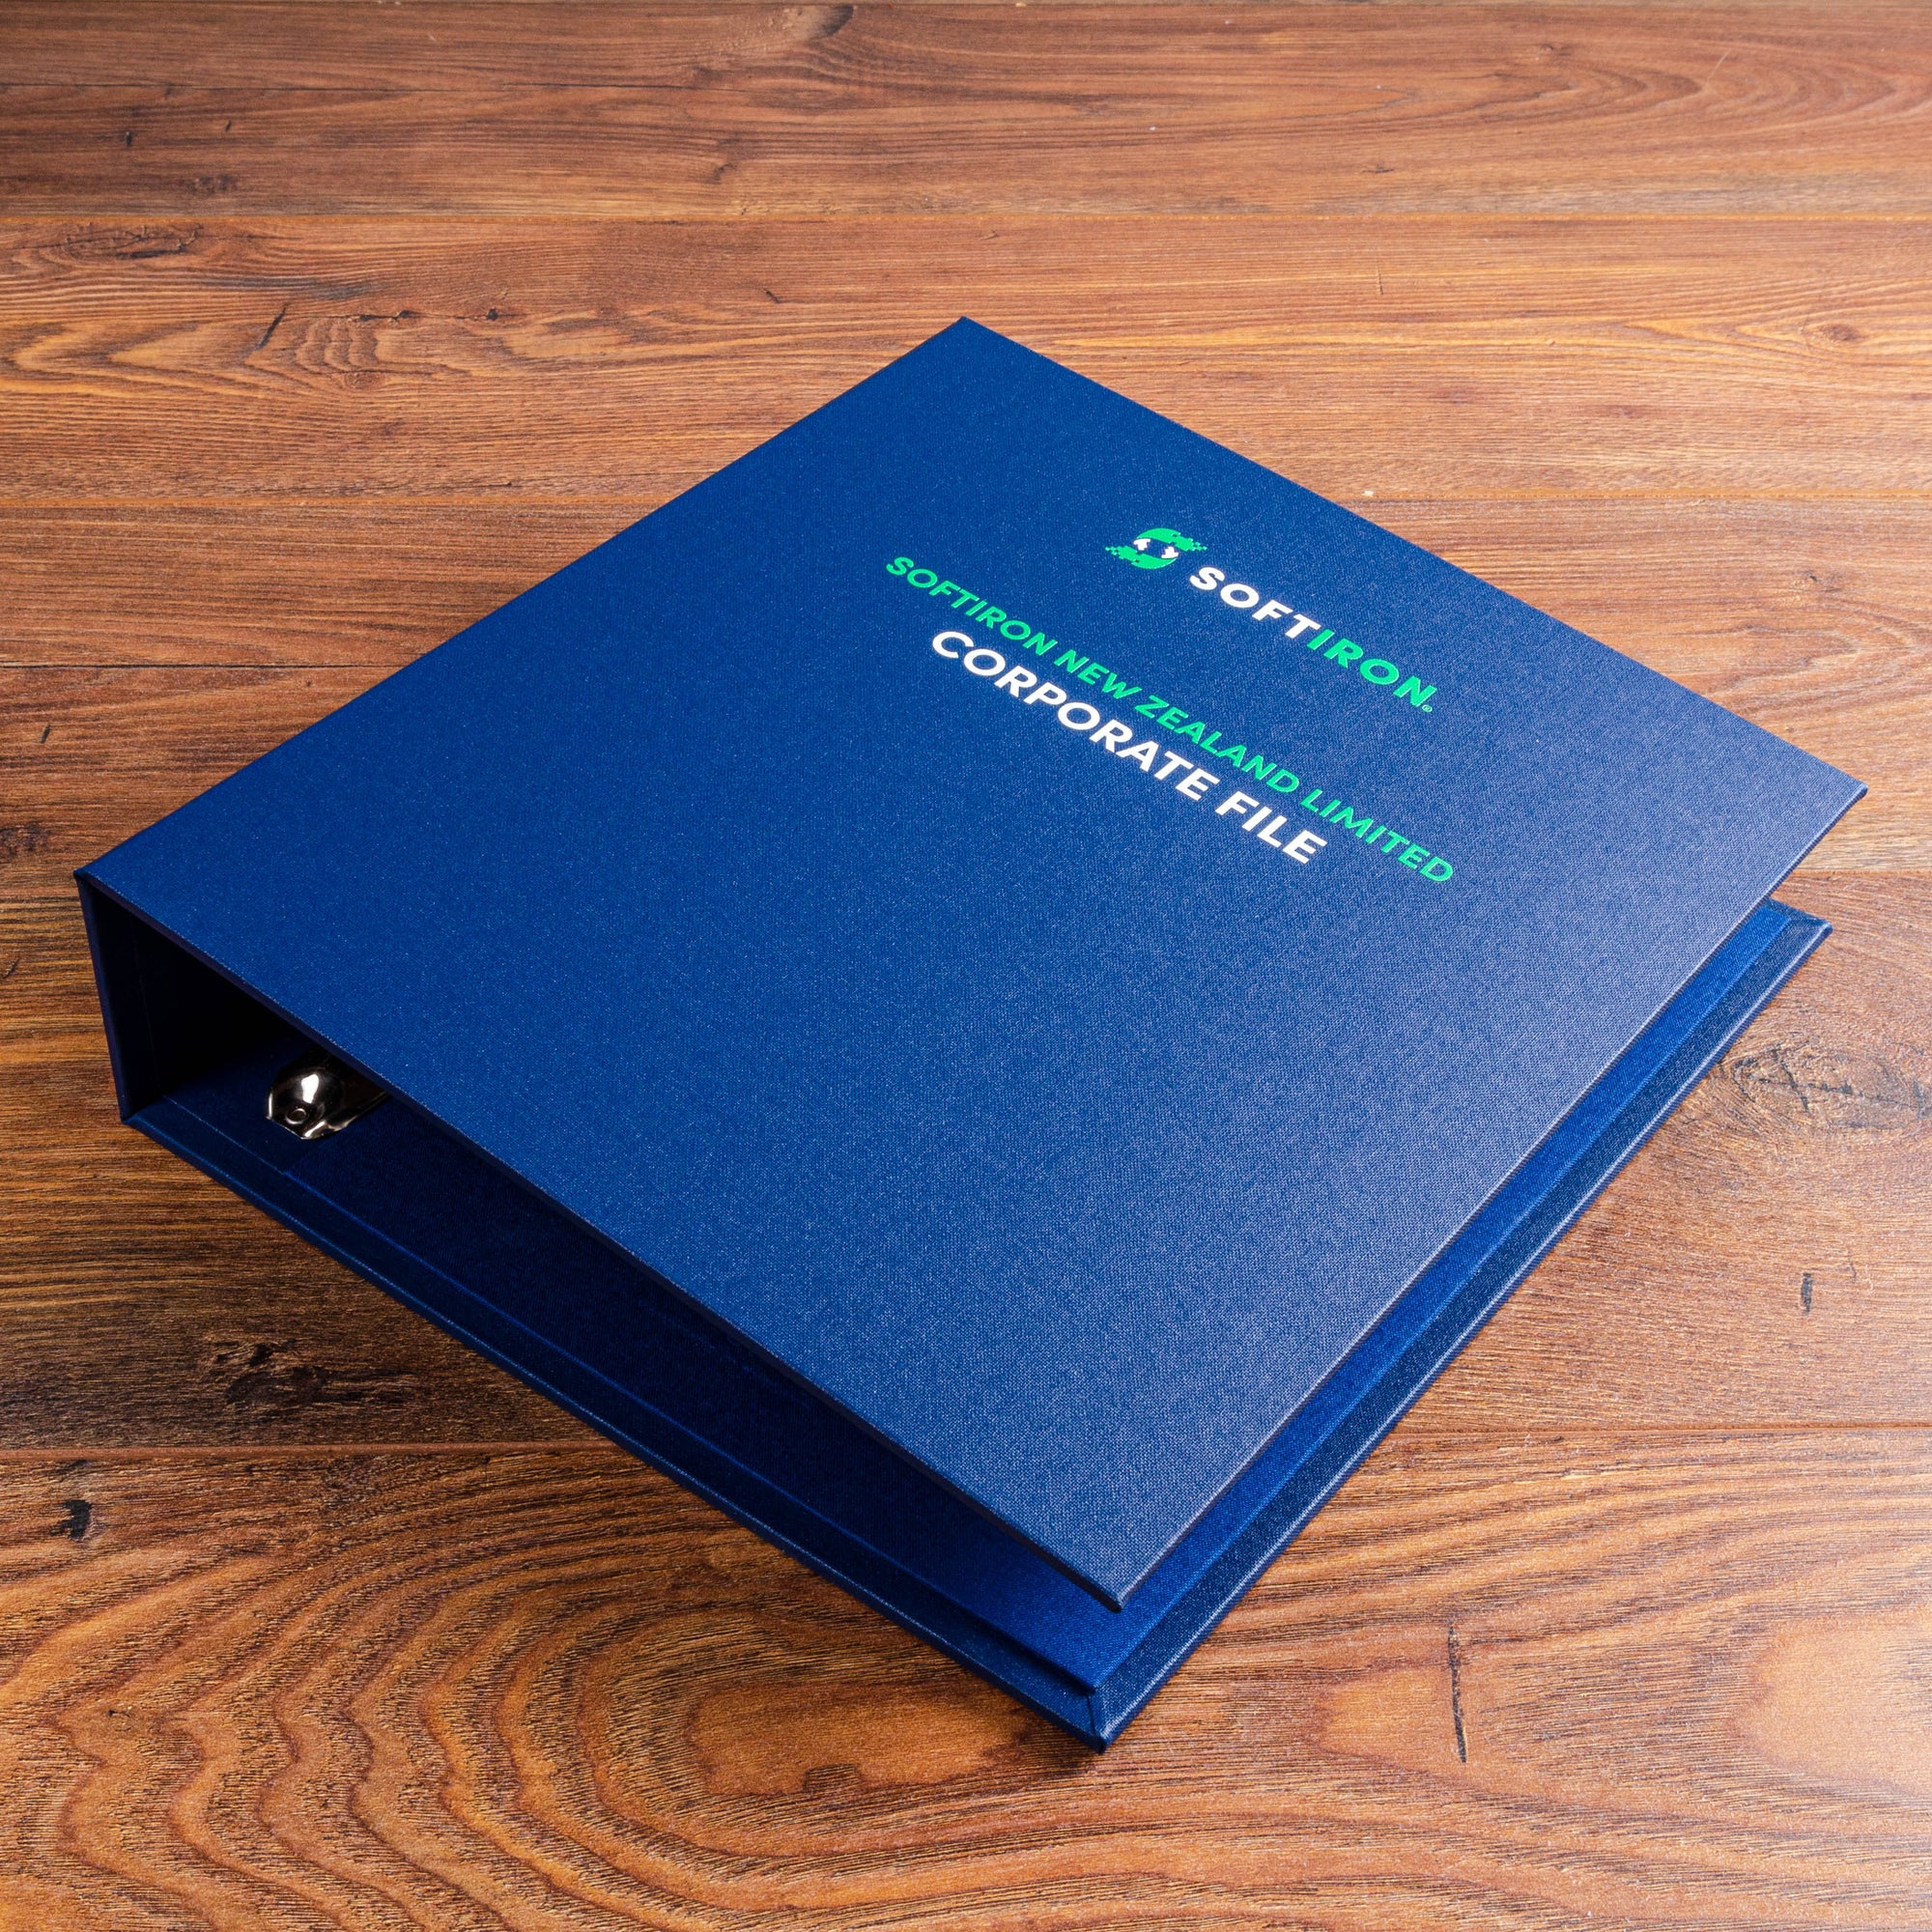 Bespoke A4 presentation binder with personalised cover